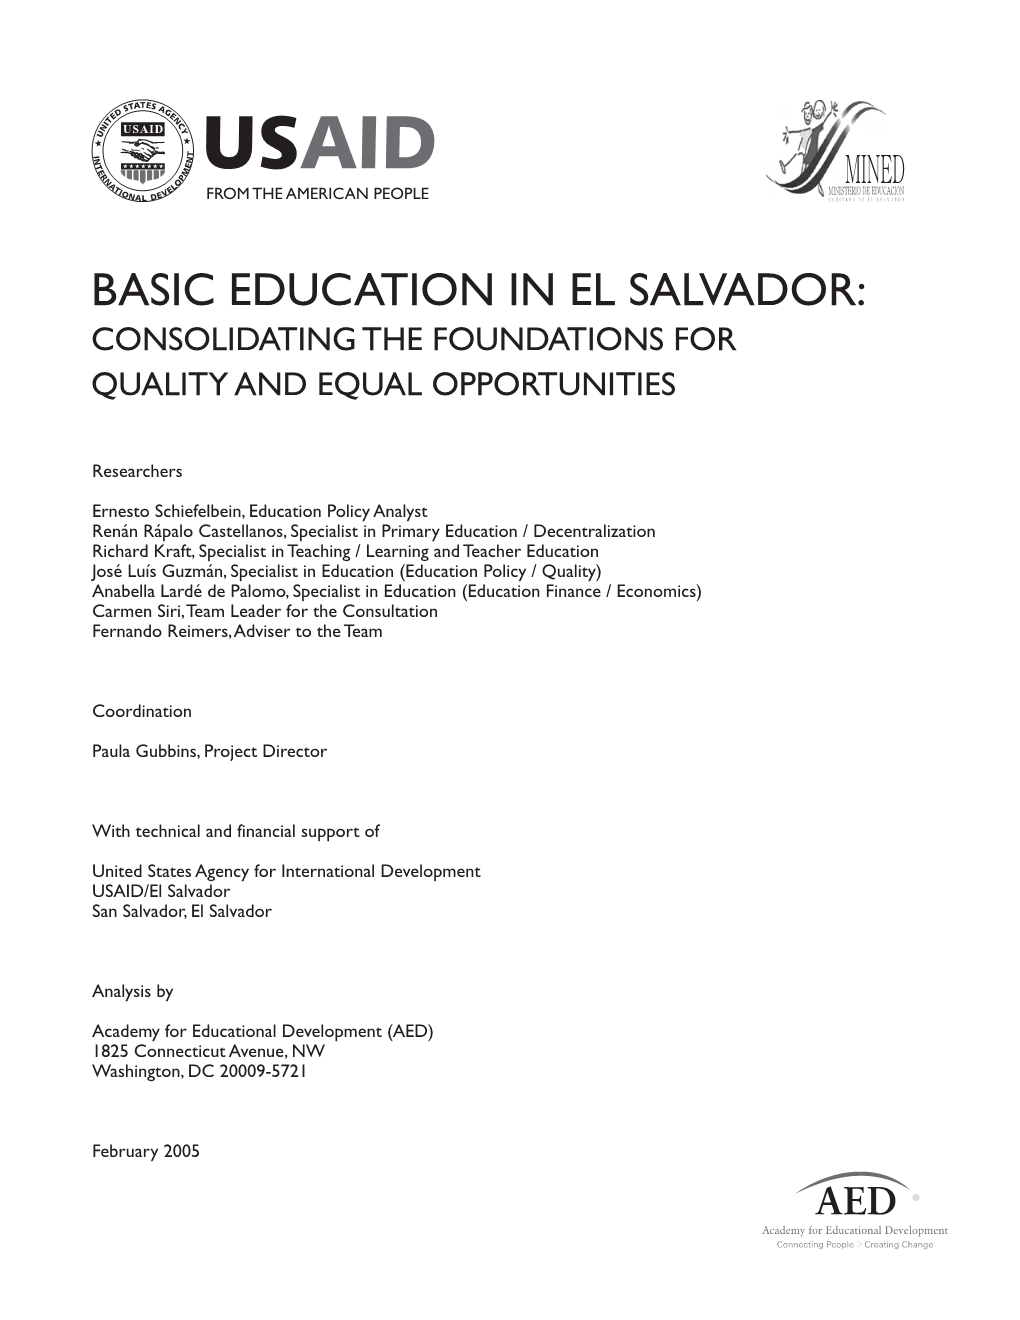 Basic Education in El Salvador: Consolidating the Foundations For